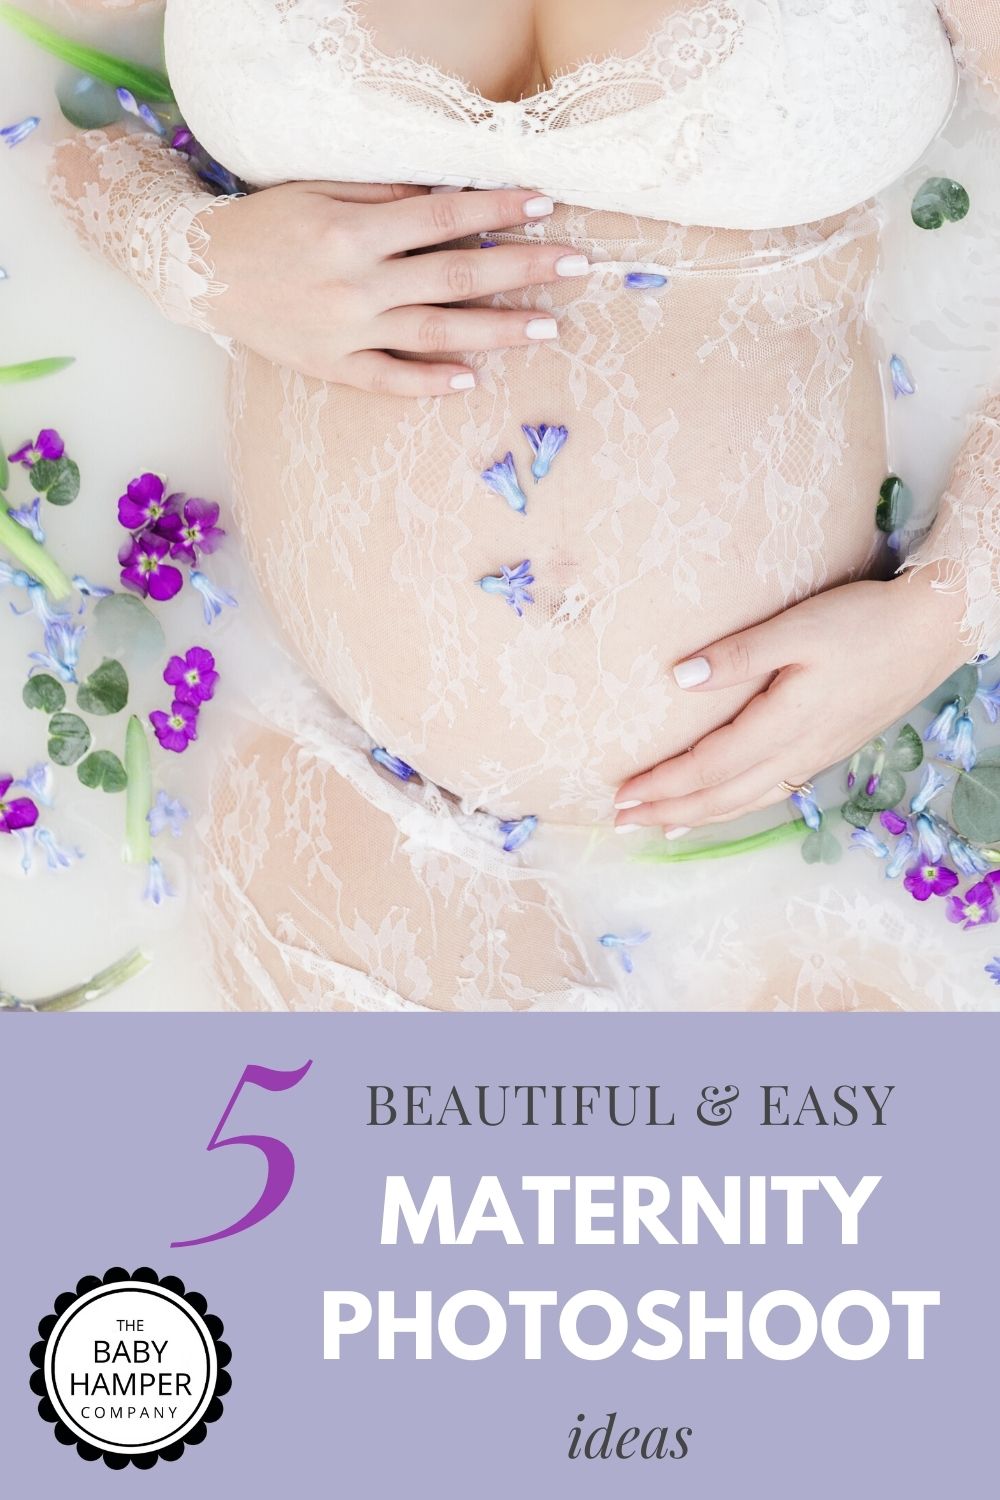 What Are The Simple Tips To Enjoy An Amazing Maternity Photoshoot